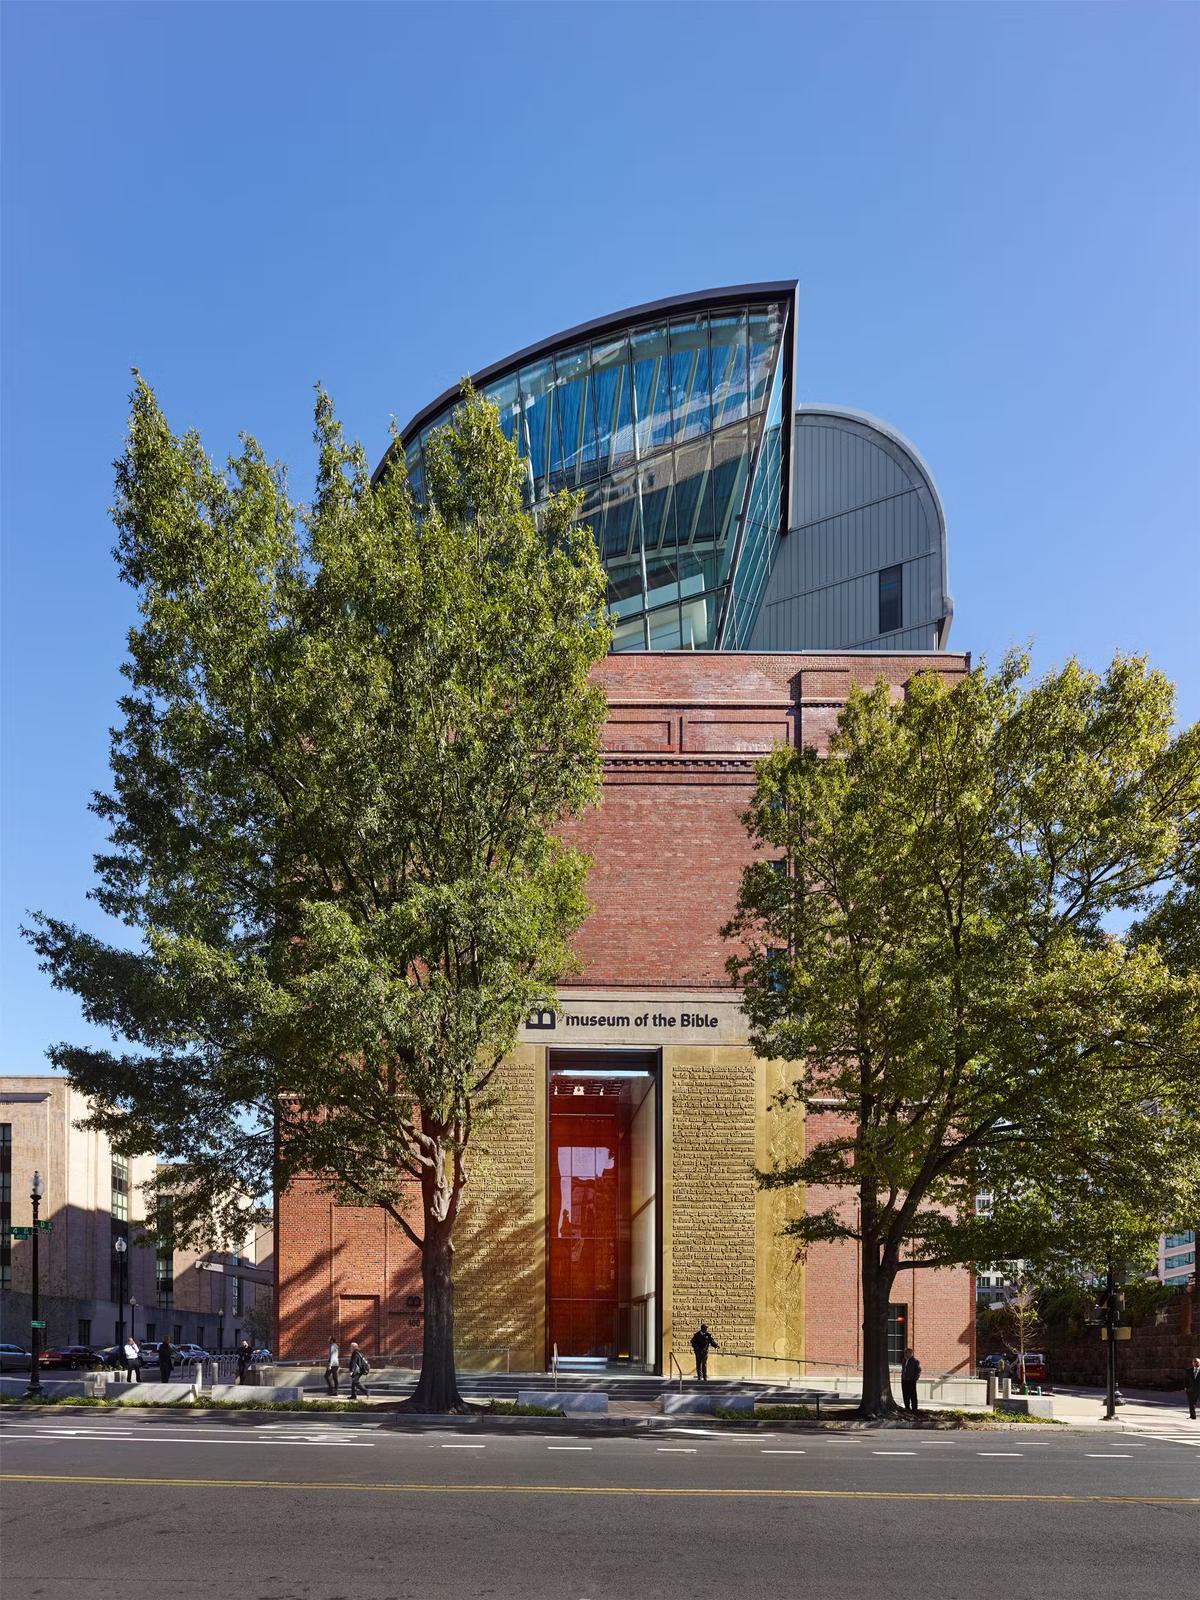 Two 40-foot bronze doors greet visitors to Museum of the Bible located in downtown D.C.<br/>(Copyright Museum of the Bible)